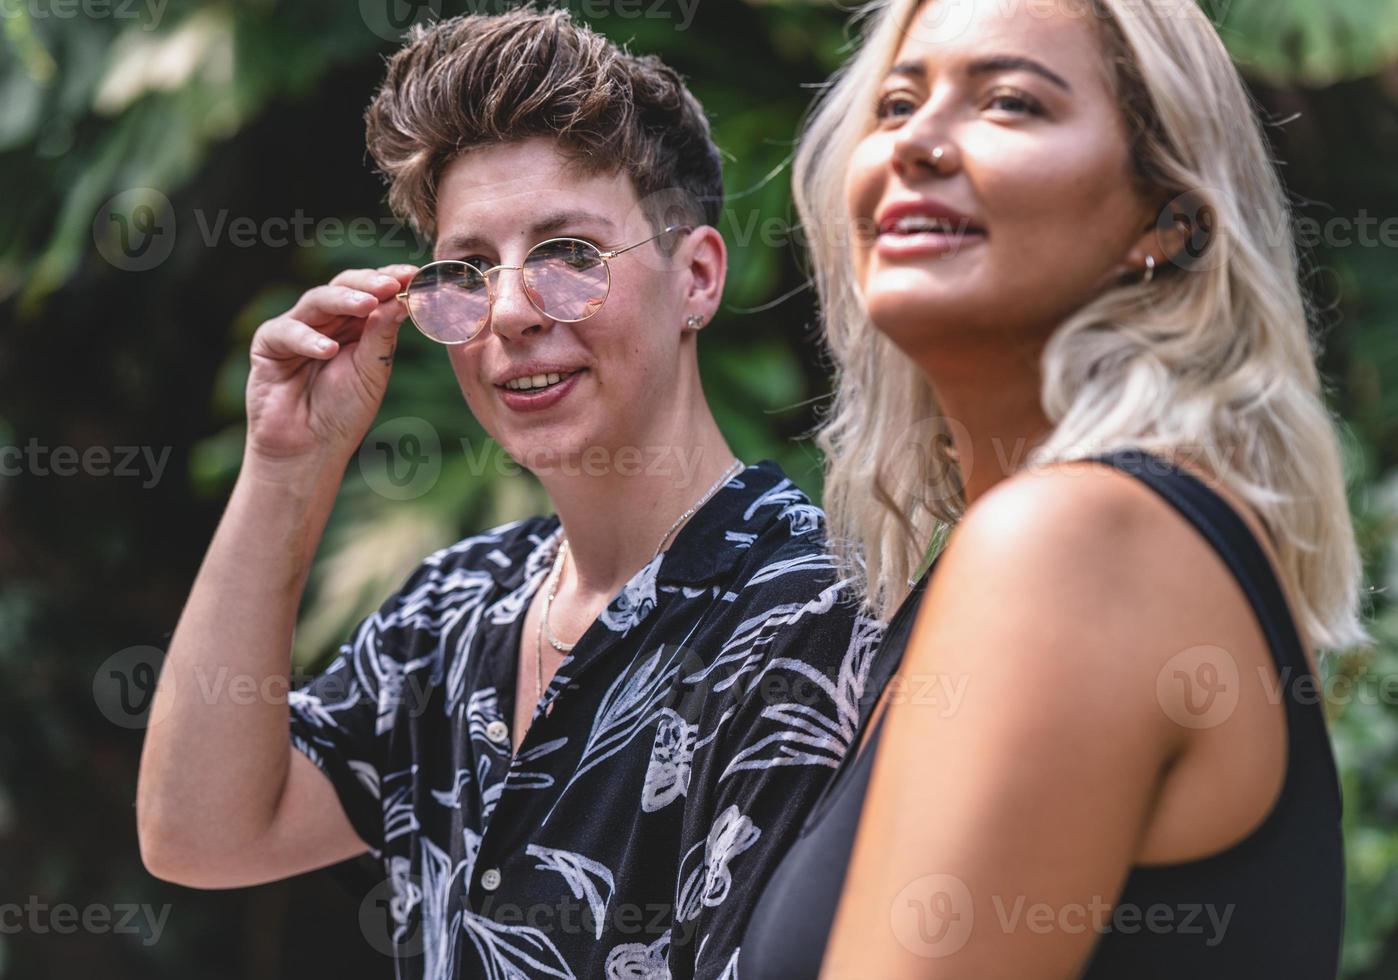 Same sex young married female couple in their daily routine showing some affection LGBT 15975713 Stock Photo at Vecteezy